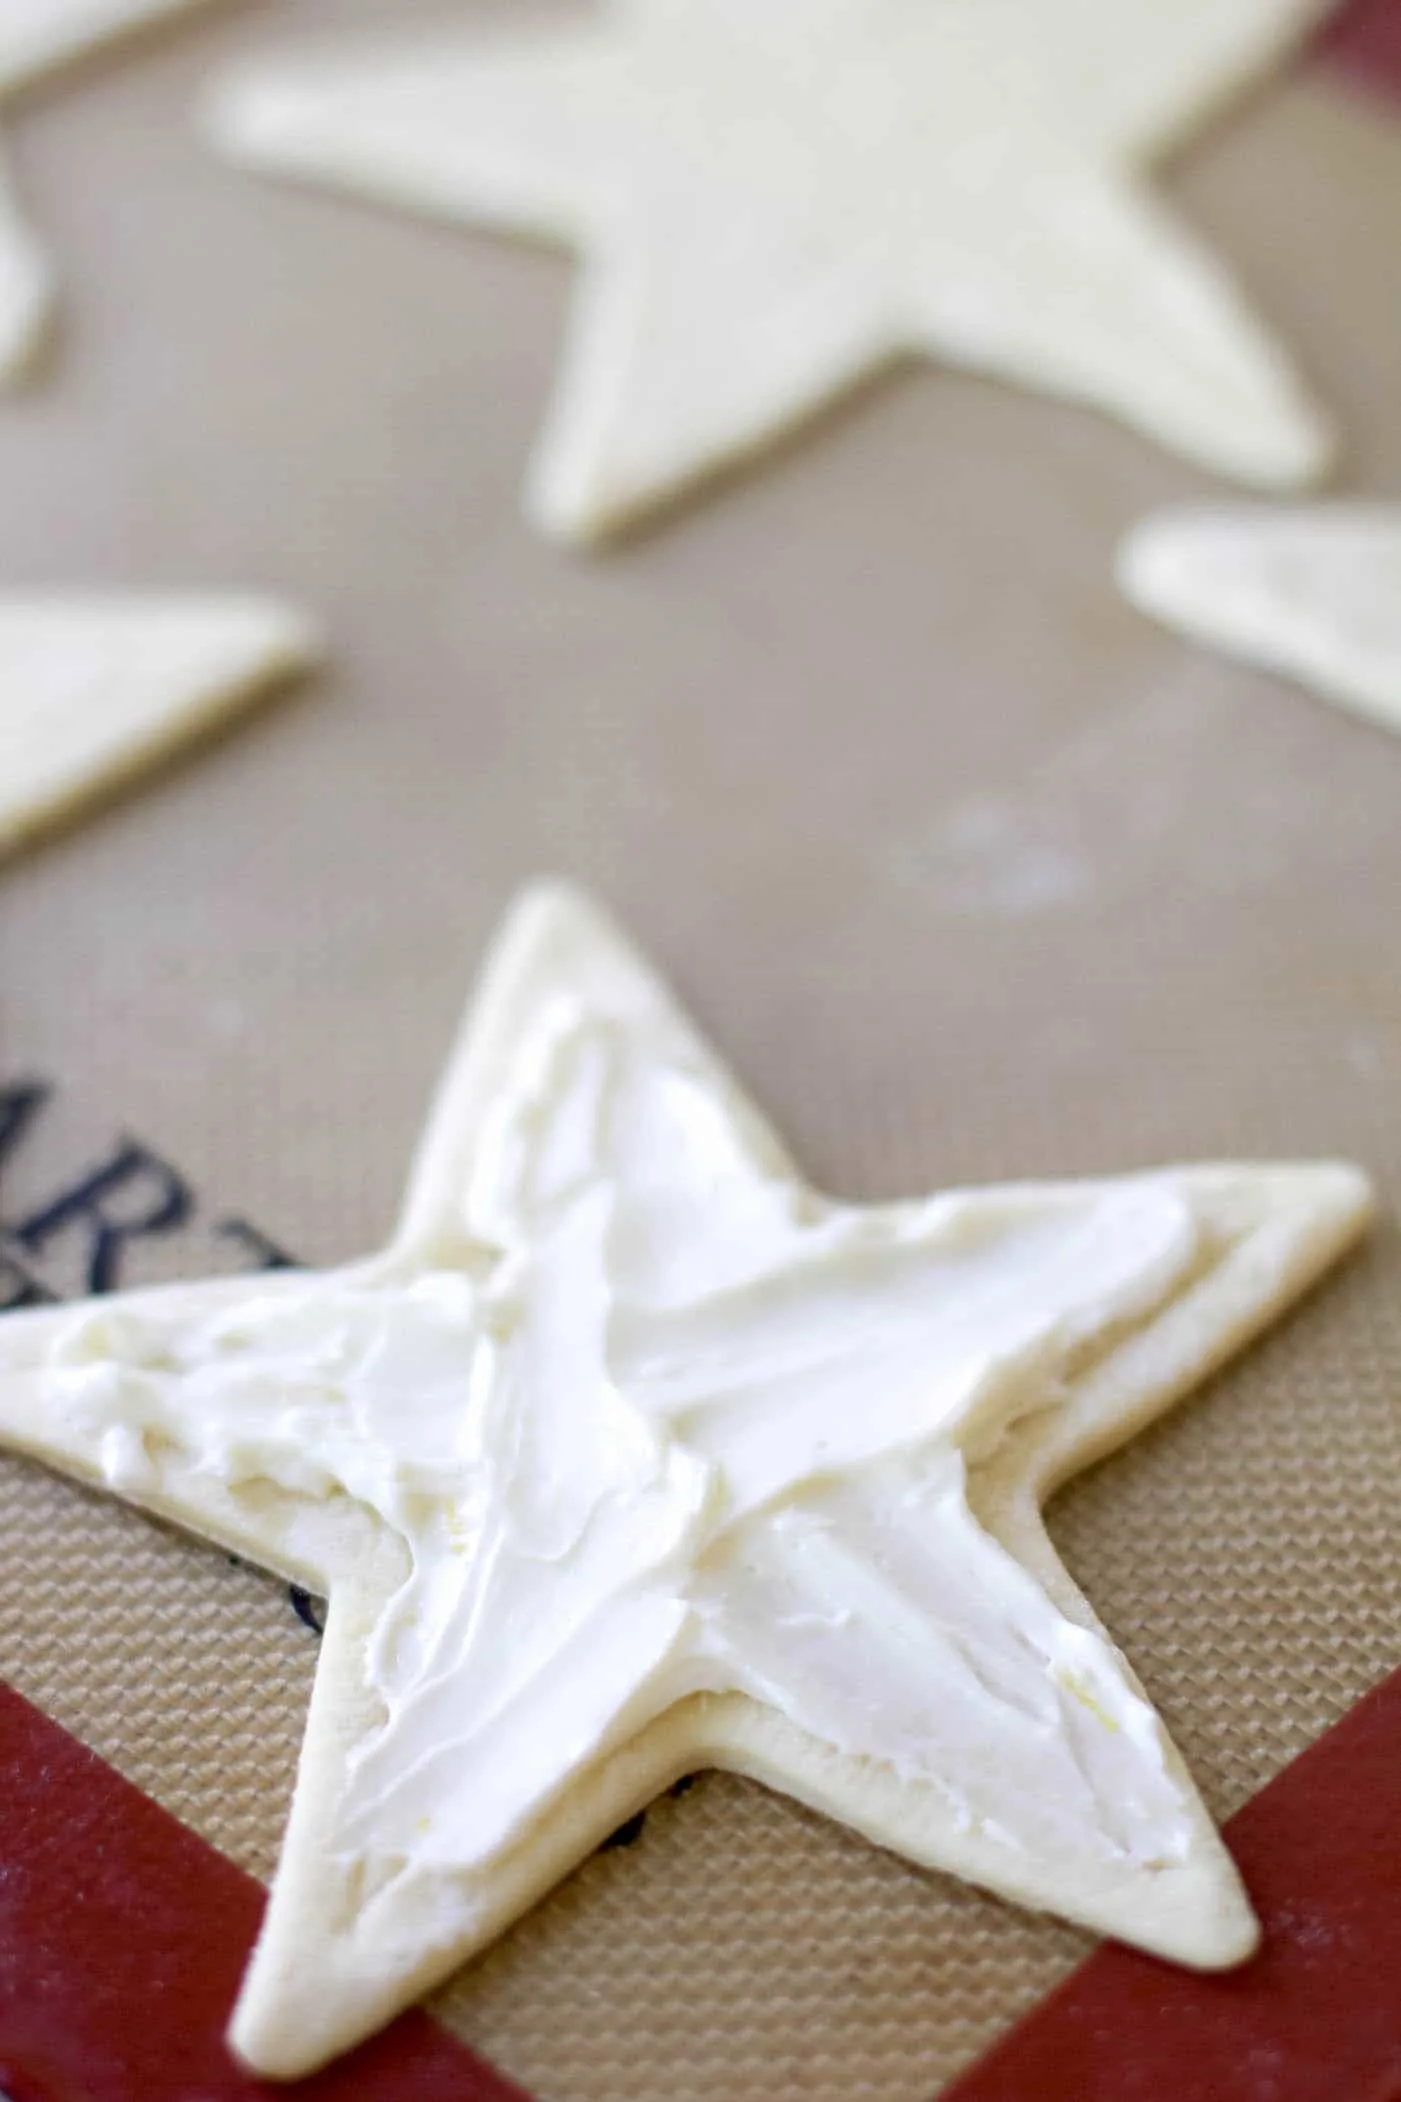 Gently spread the cream cheese mixture onto the middle of the stars